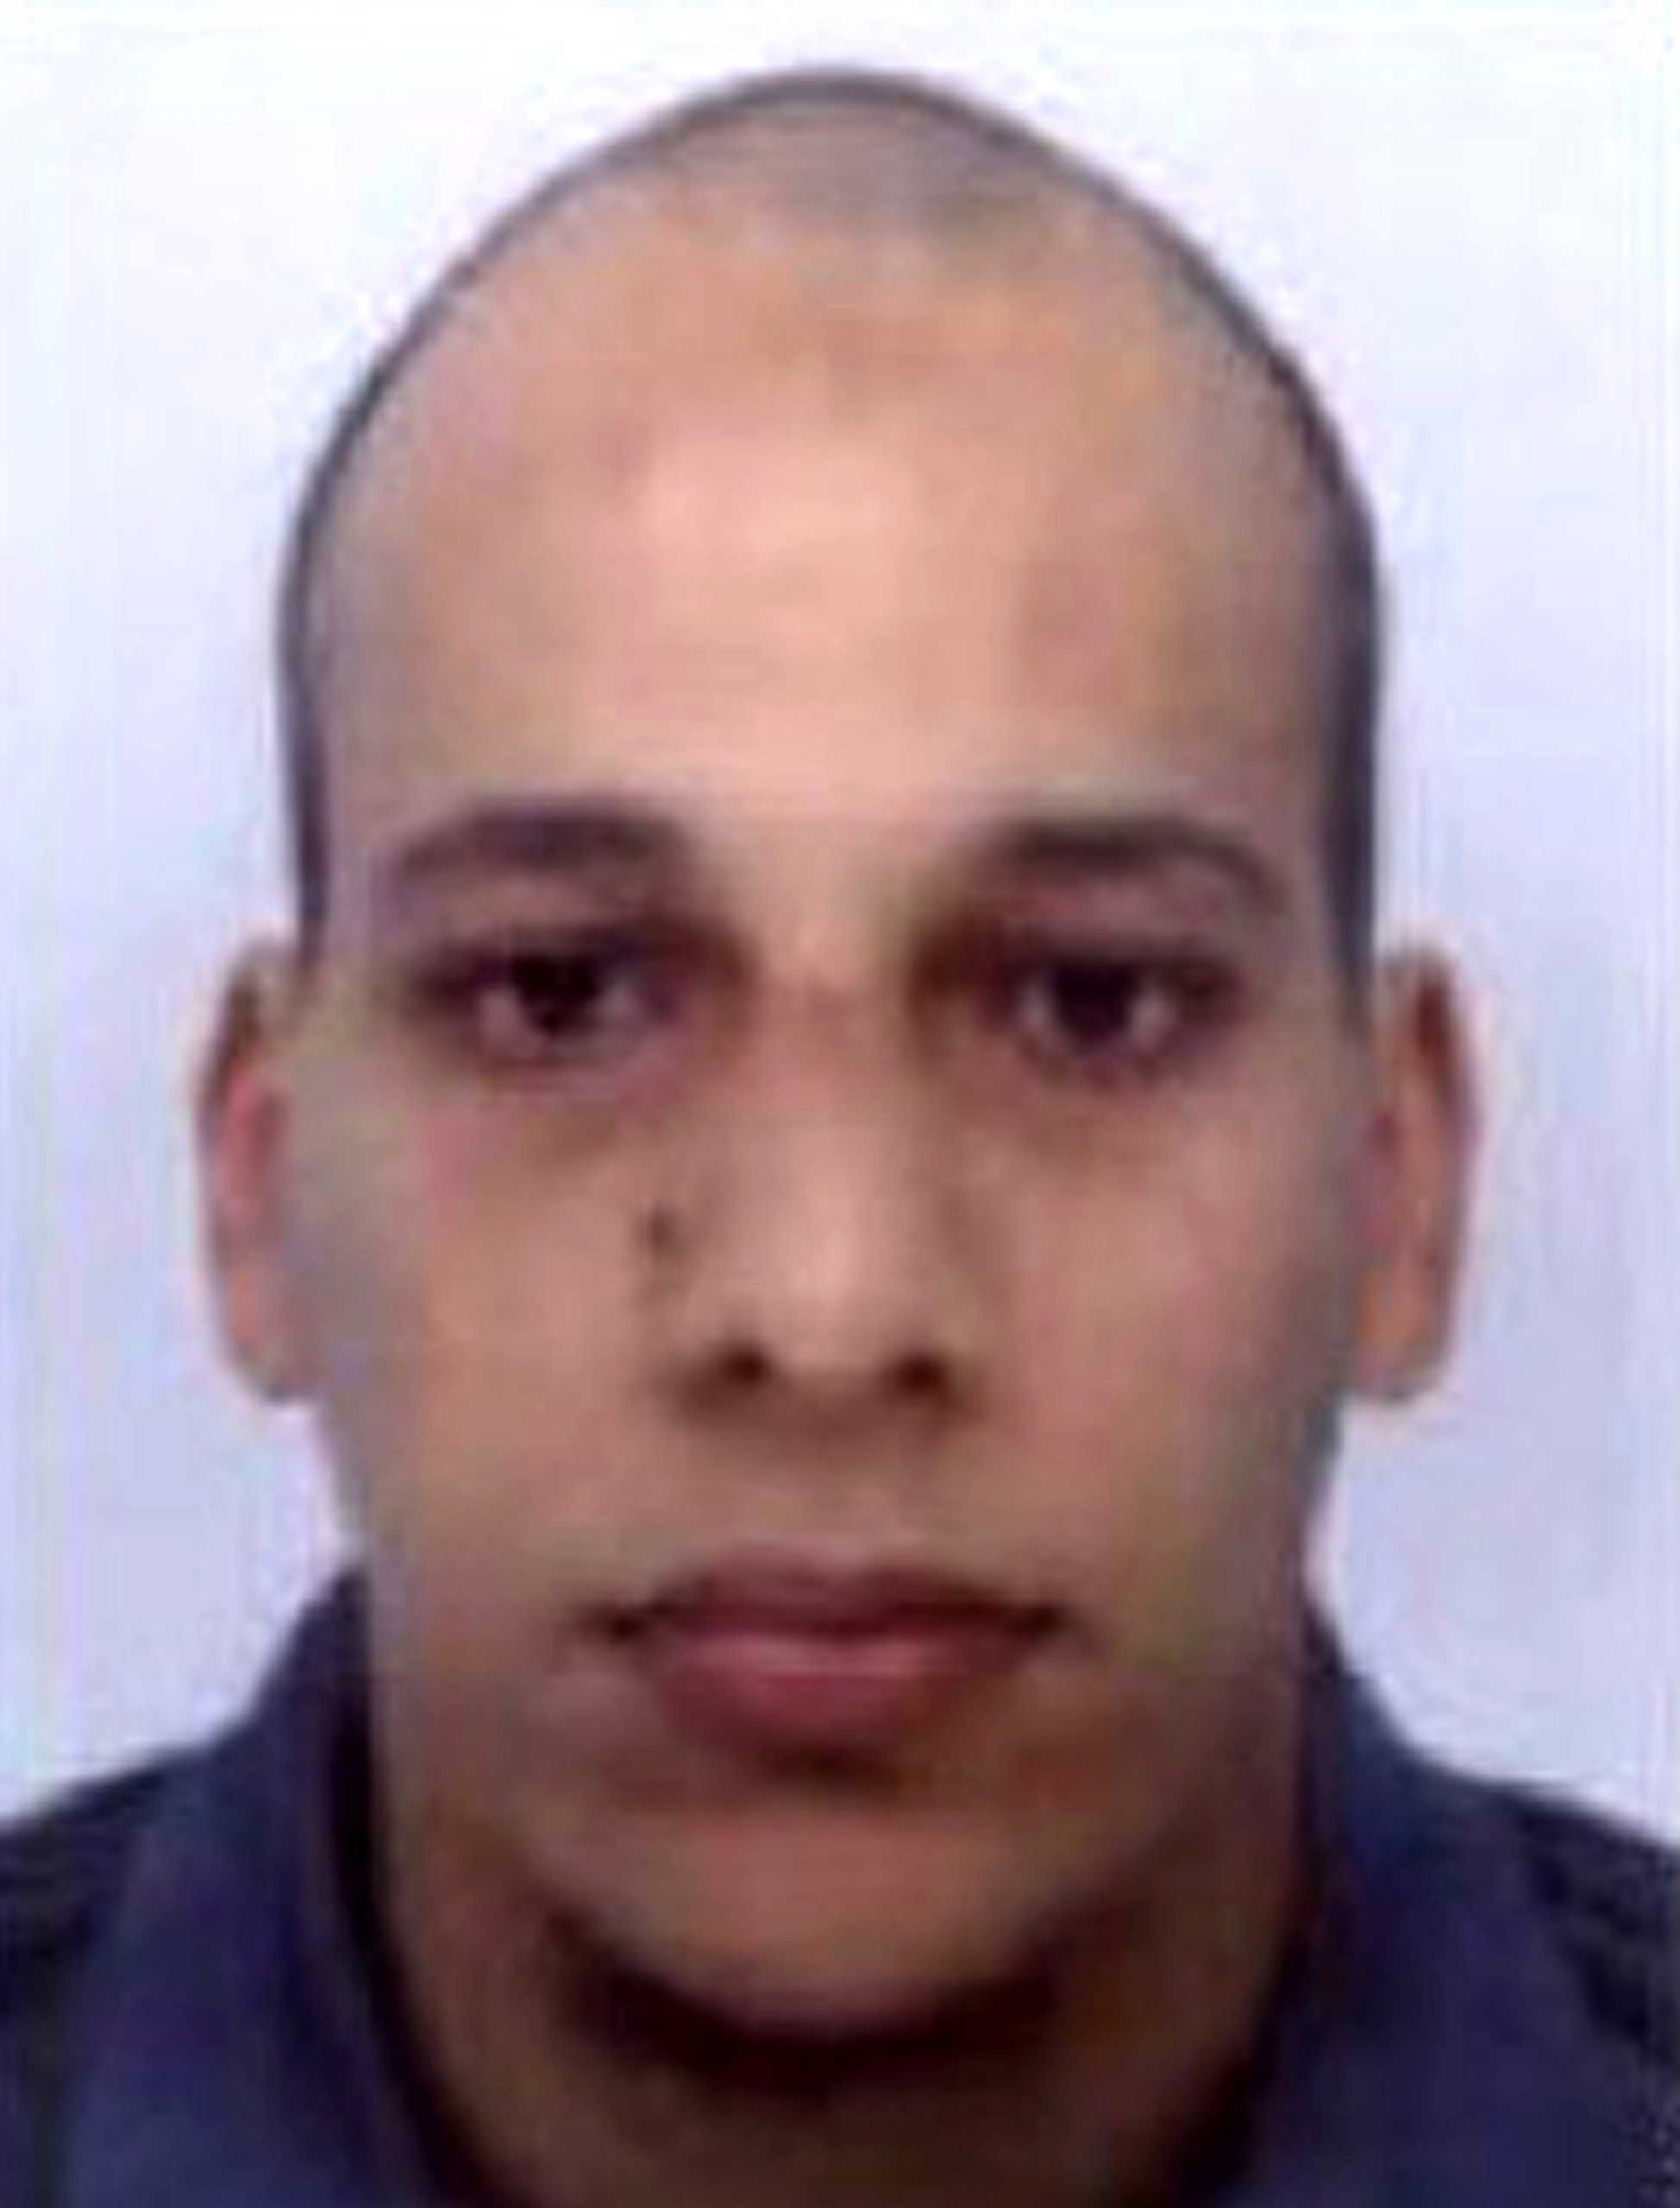 Suspect's  Wanted In Connection With Attack At The Satirical Weekly Charlie Hebdo